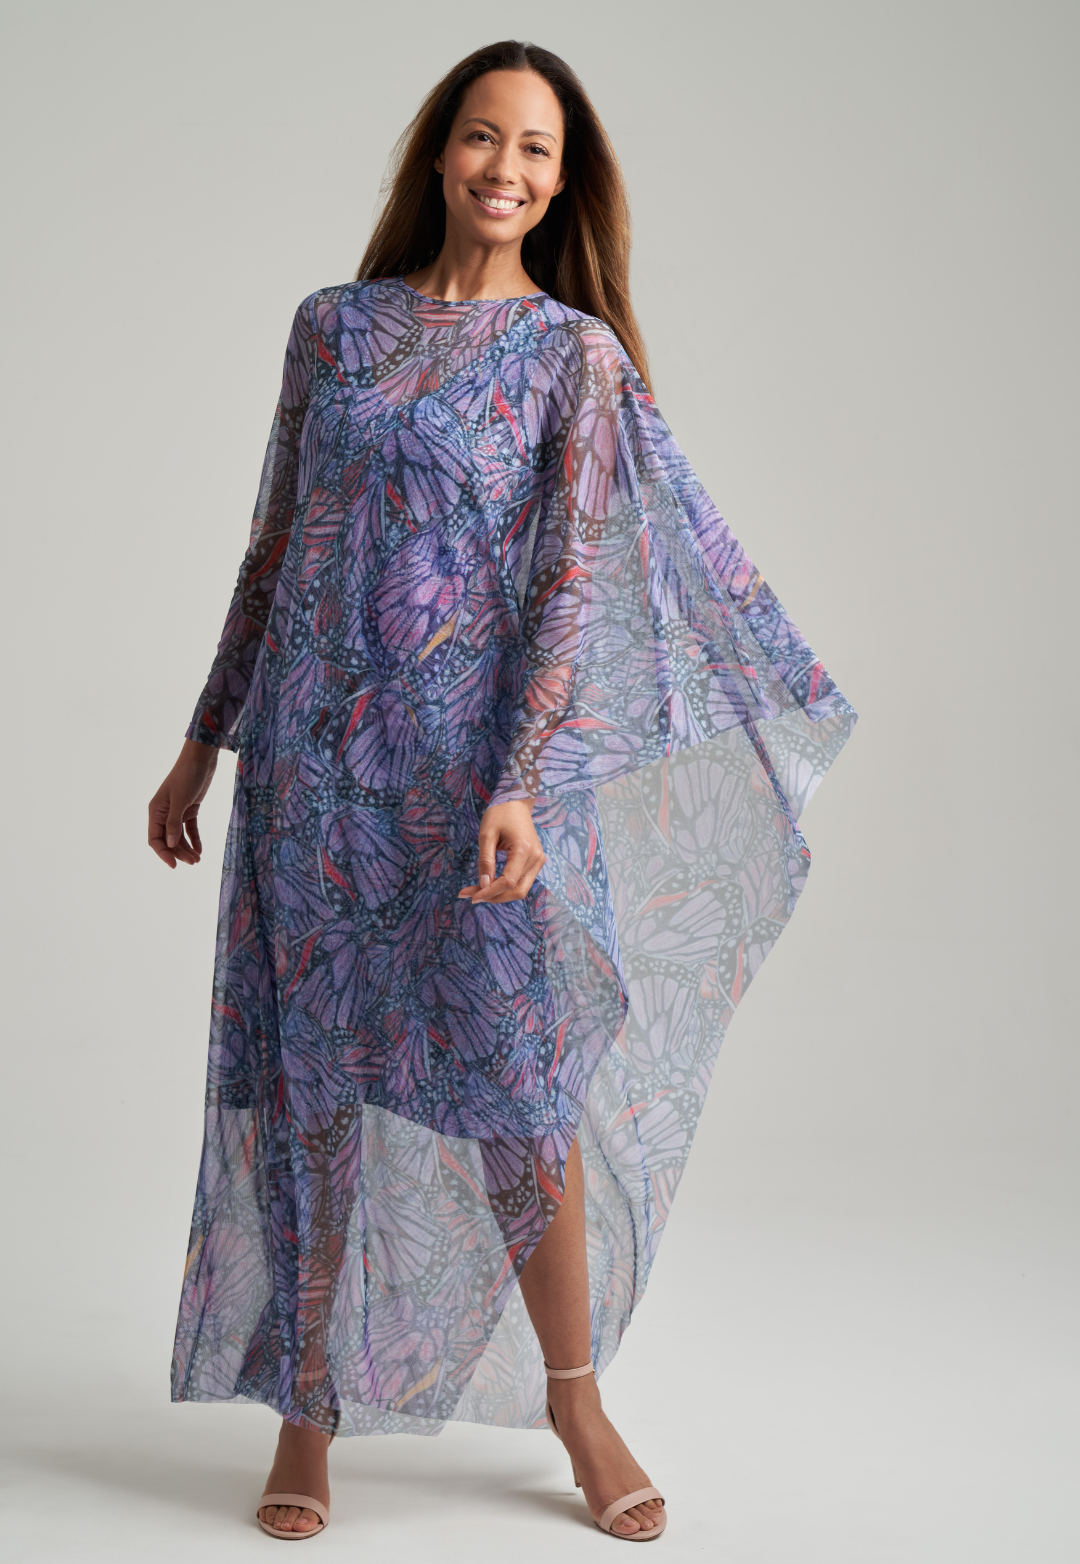 Woman wearing stretch knit butterfly printed short dress under mesh one armed butterfly printed kaftan poncho by Ala von Auersperg for spring summer 2021